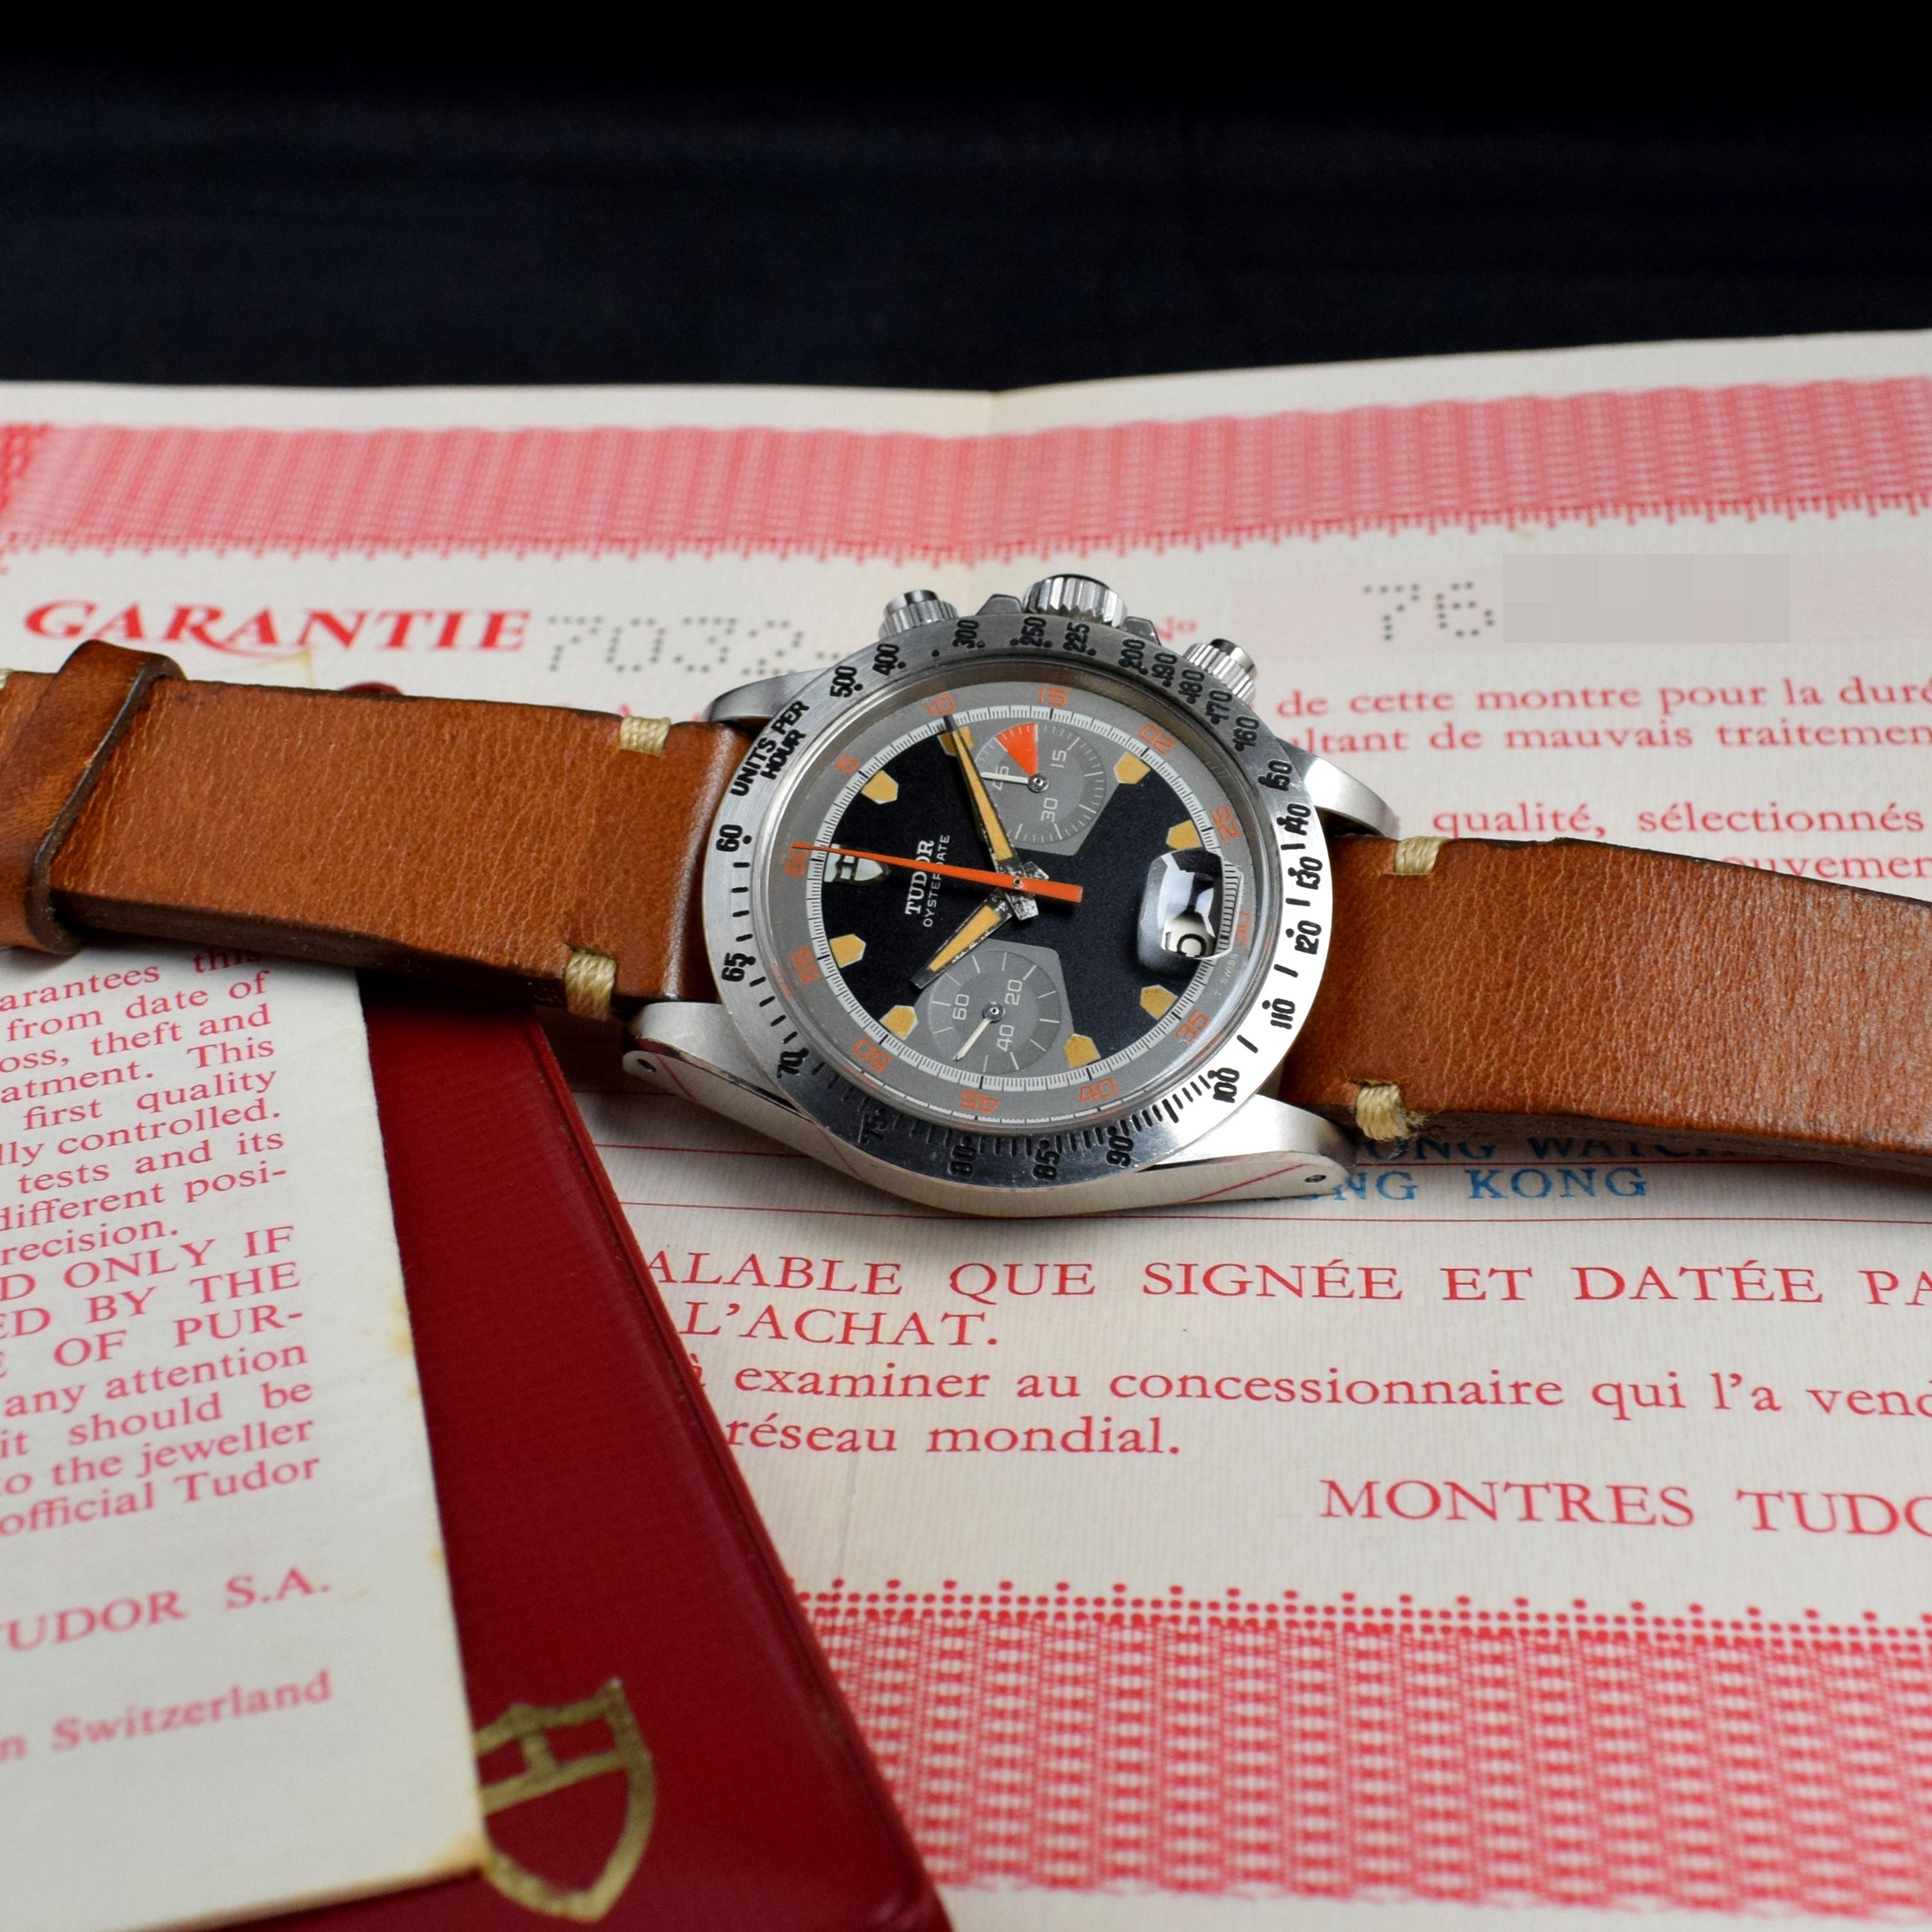 Brand: Vintage Tudor
Model: 7032
Year: 1971
Serial number: 76xxxx
Reference: OT1389

The Monte Carlo references 7032 was launched in 1970 as the first chronographs ever made by Tudor and only produced for approximately two years only. Due to the